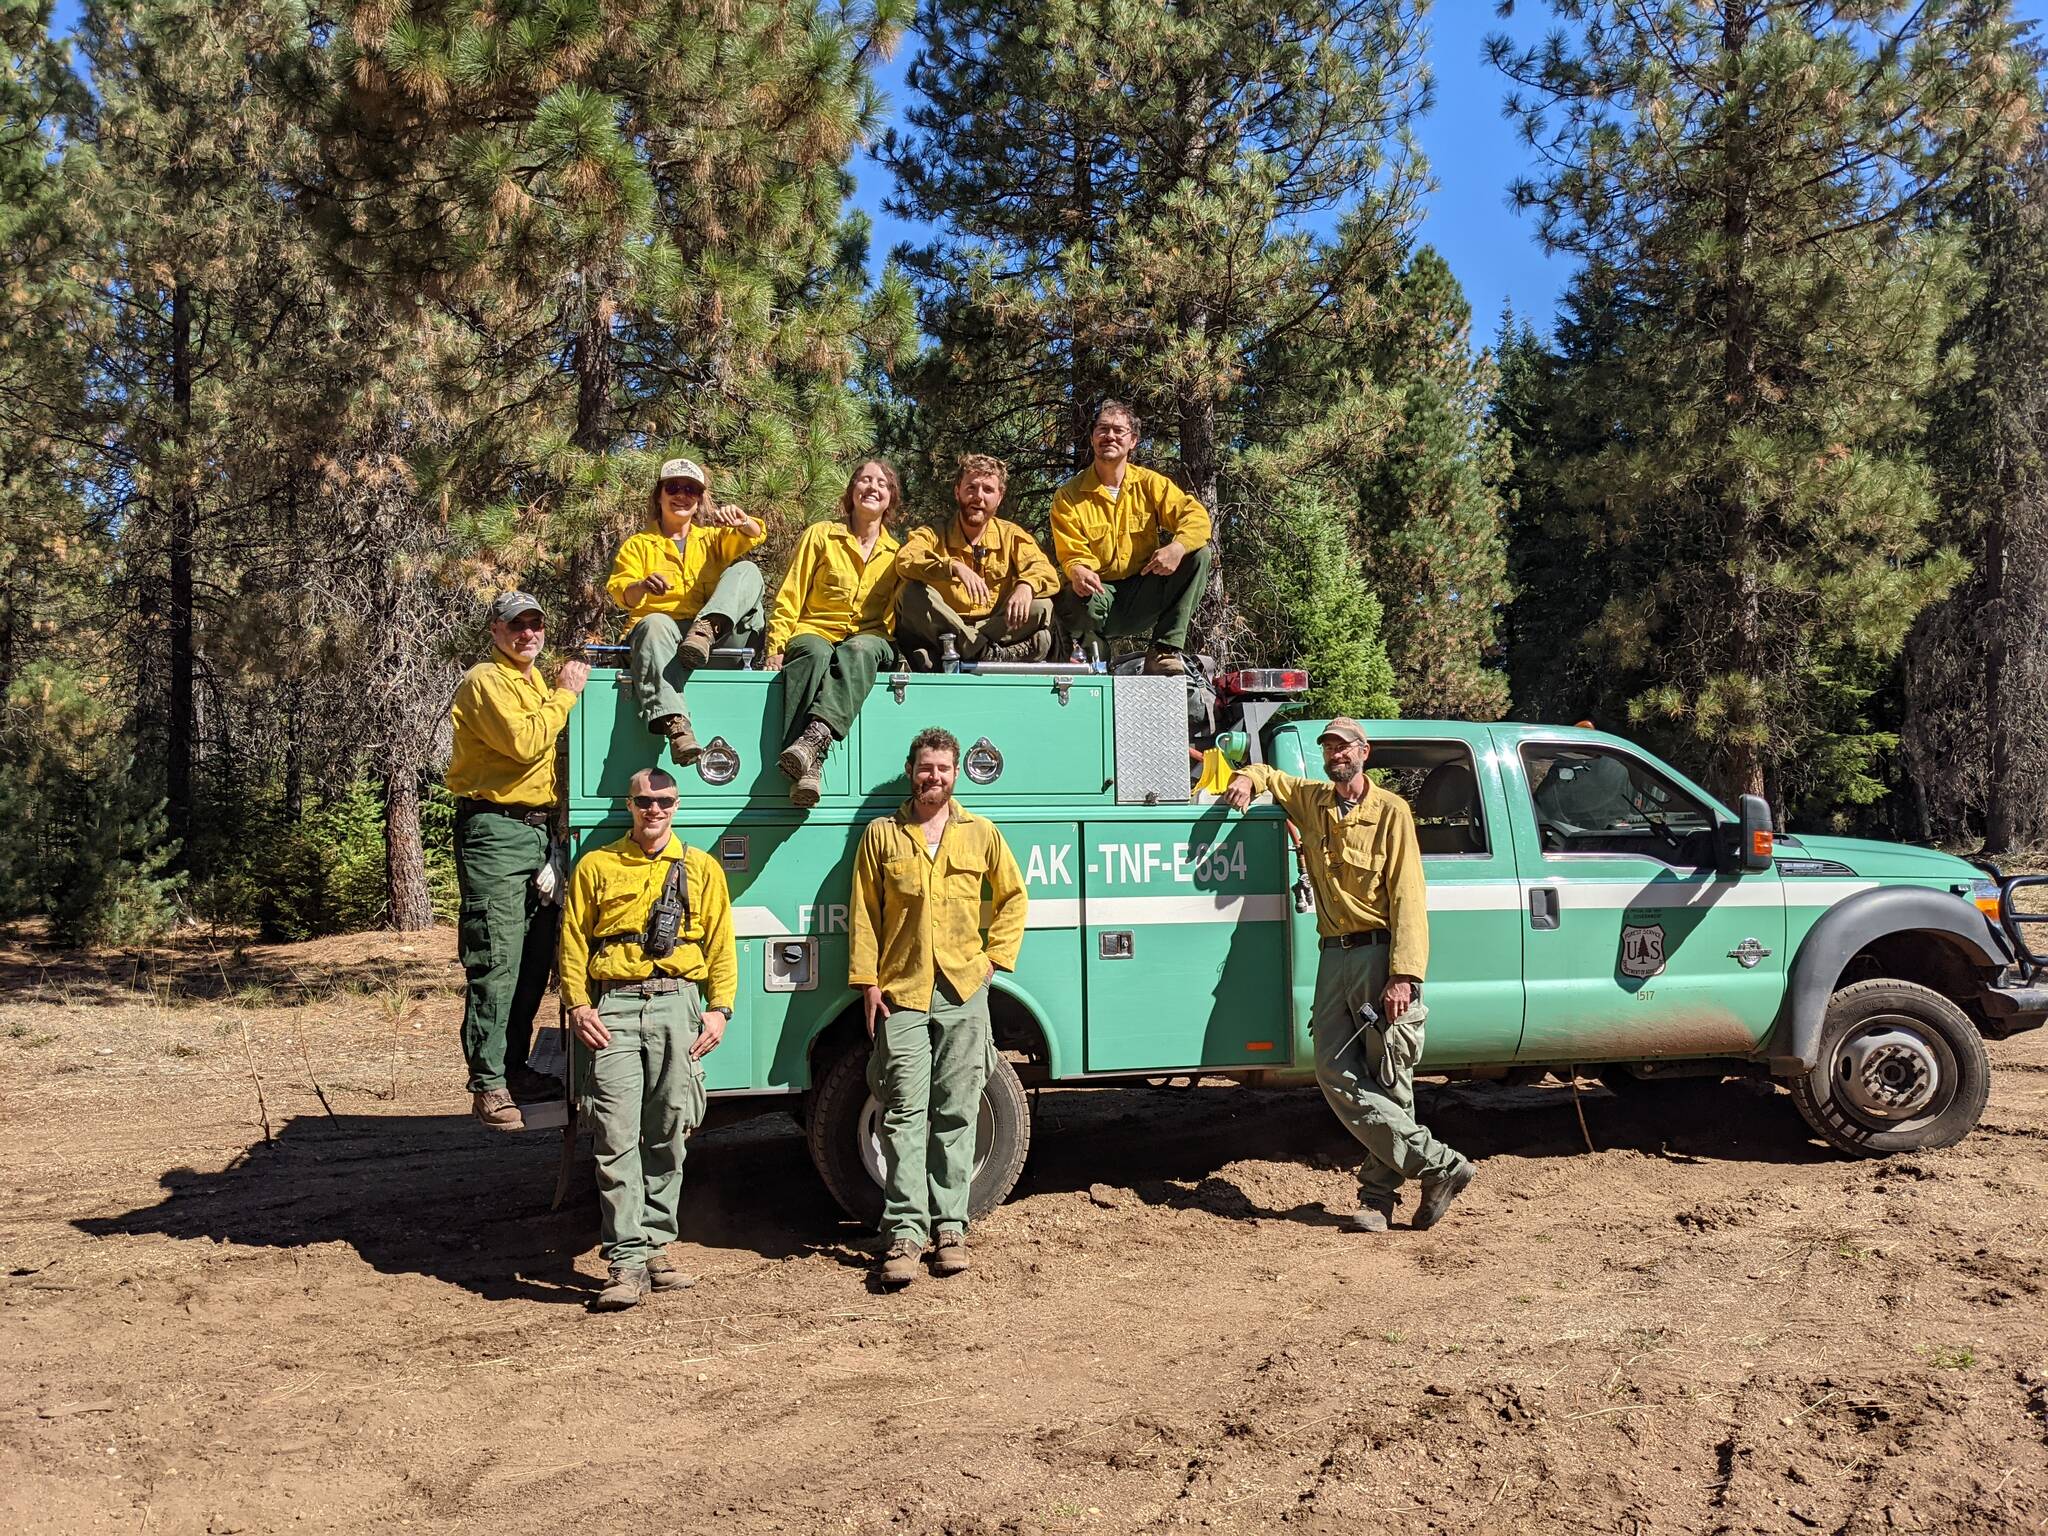 Courtesy photo / Matthew Thompson
A Forest Service fire crew takes a break during an operation. Fire crews from Alaska are frequently deployed to the Lower 48 to help combat wildfires that are growing larger and closer to urban areas in many cases.